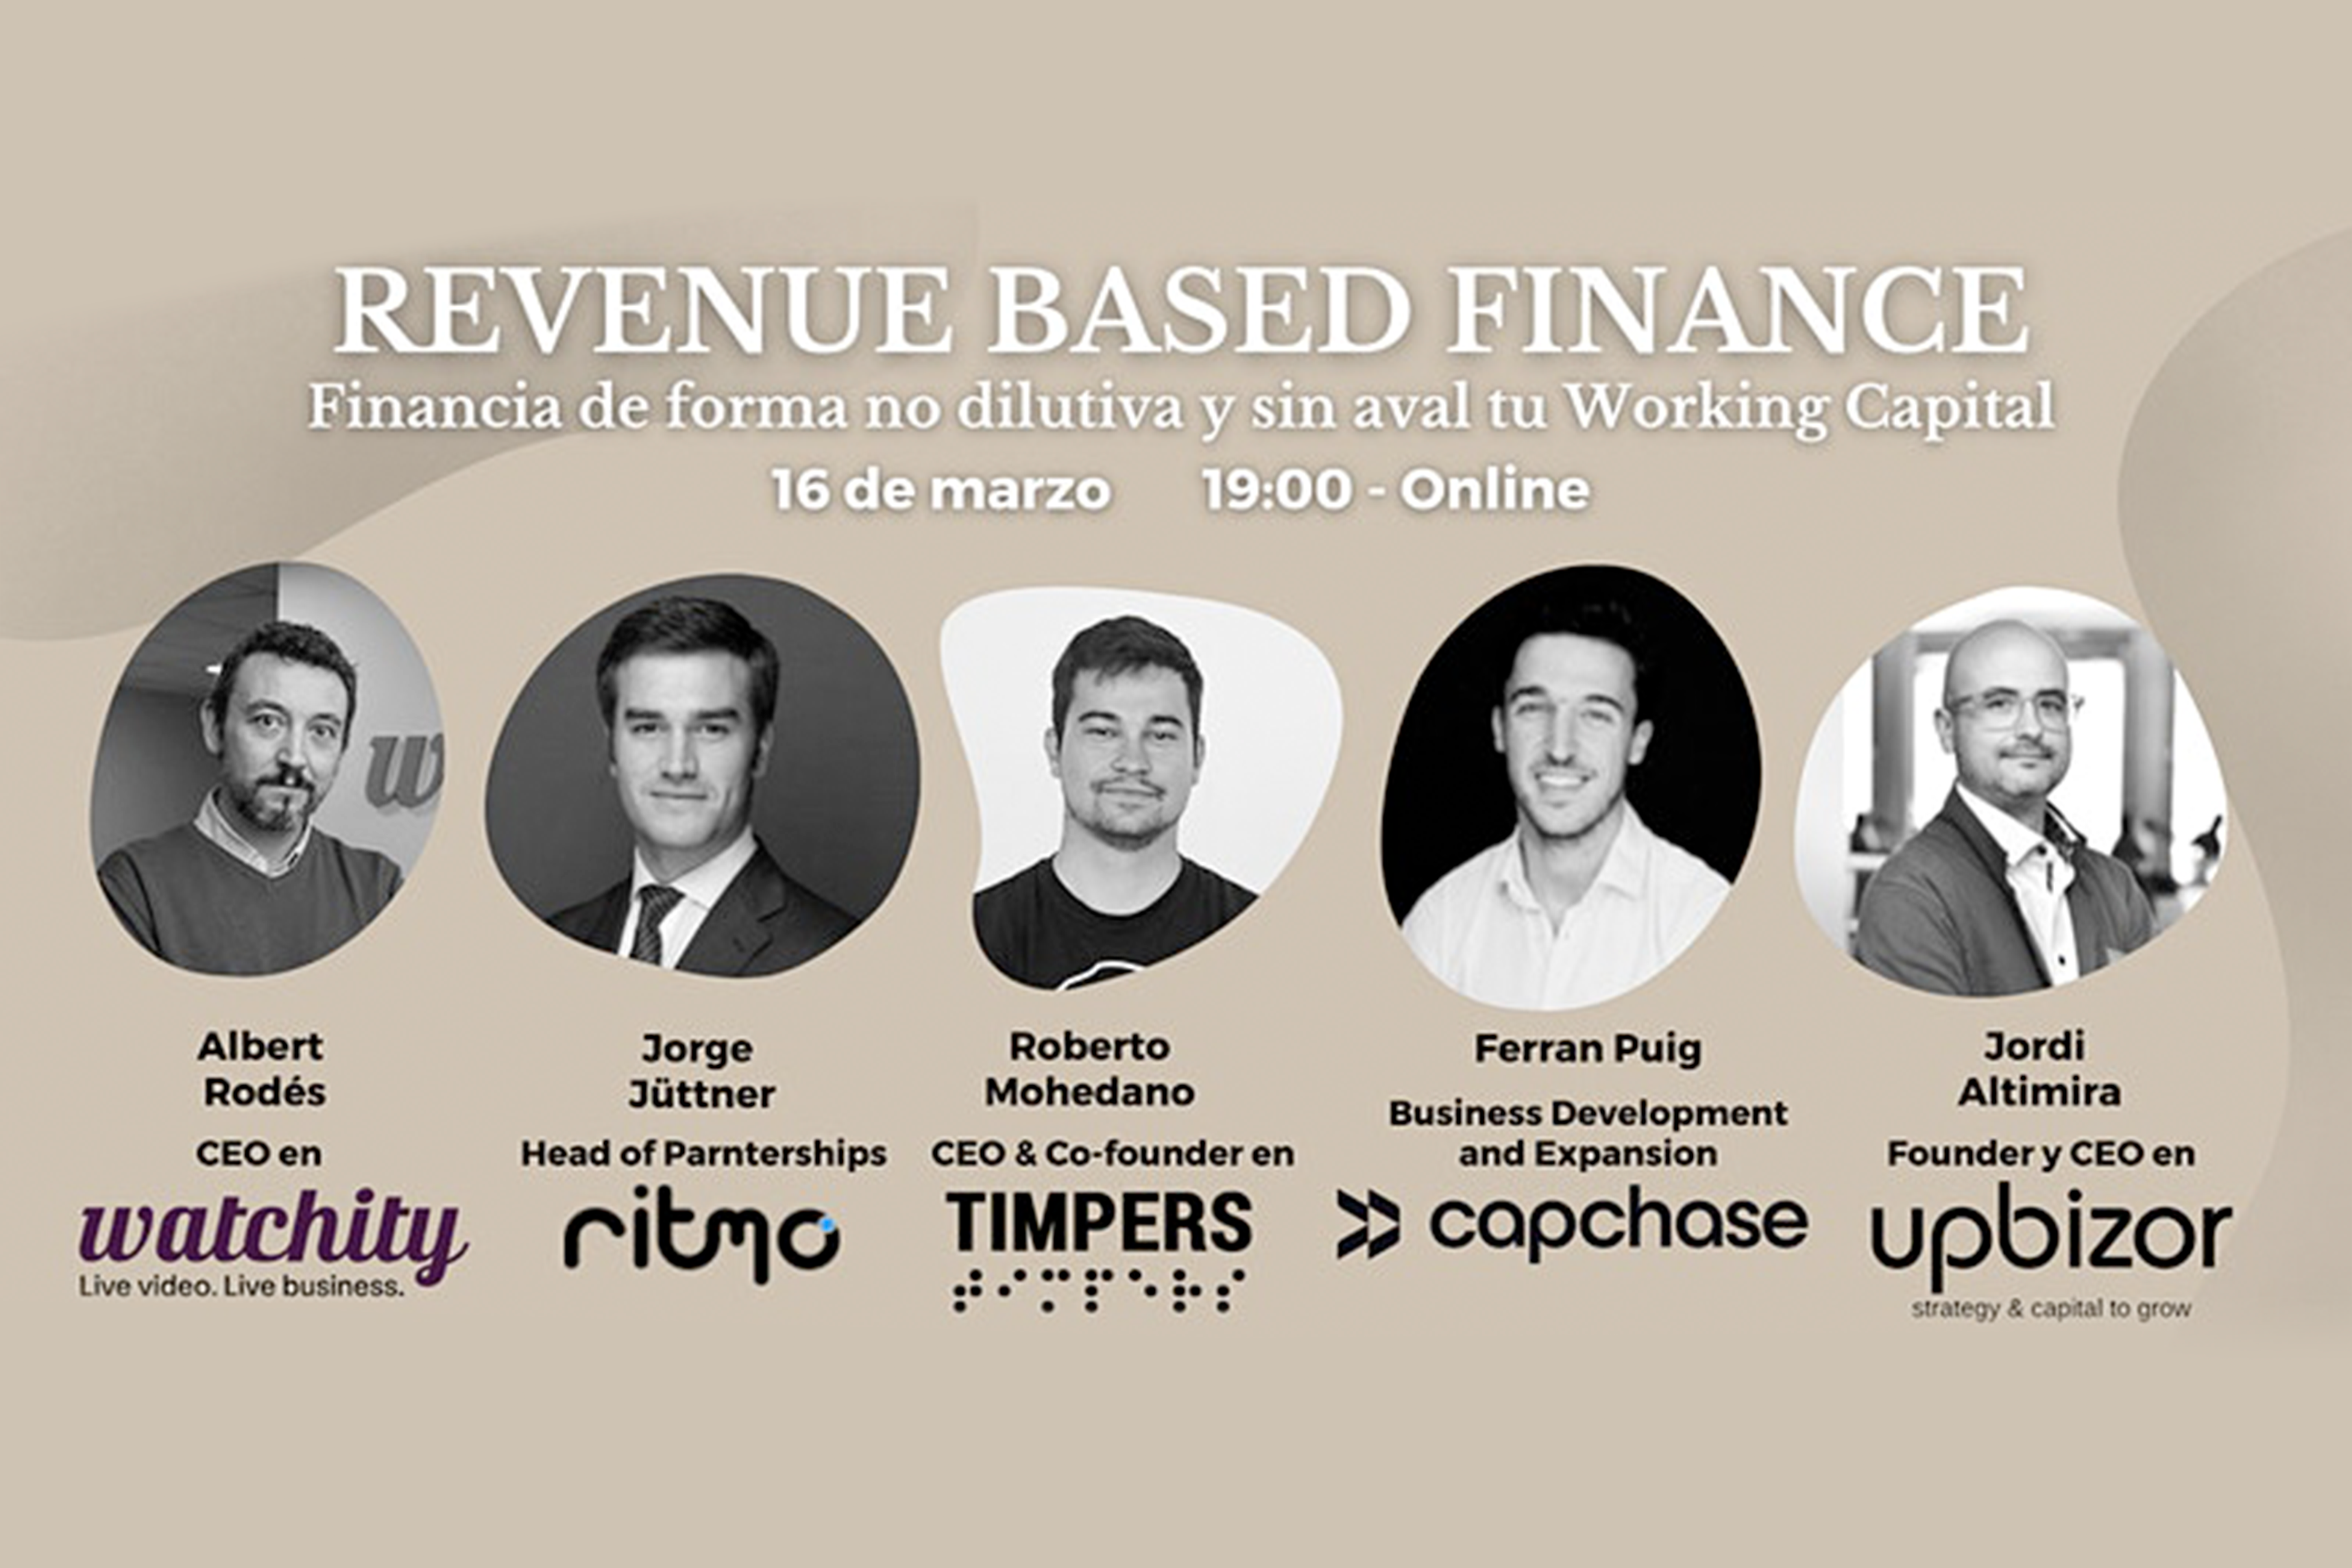 Watchity at the Revenue Based Finance webinar